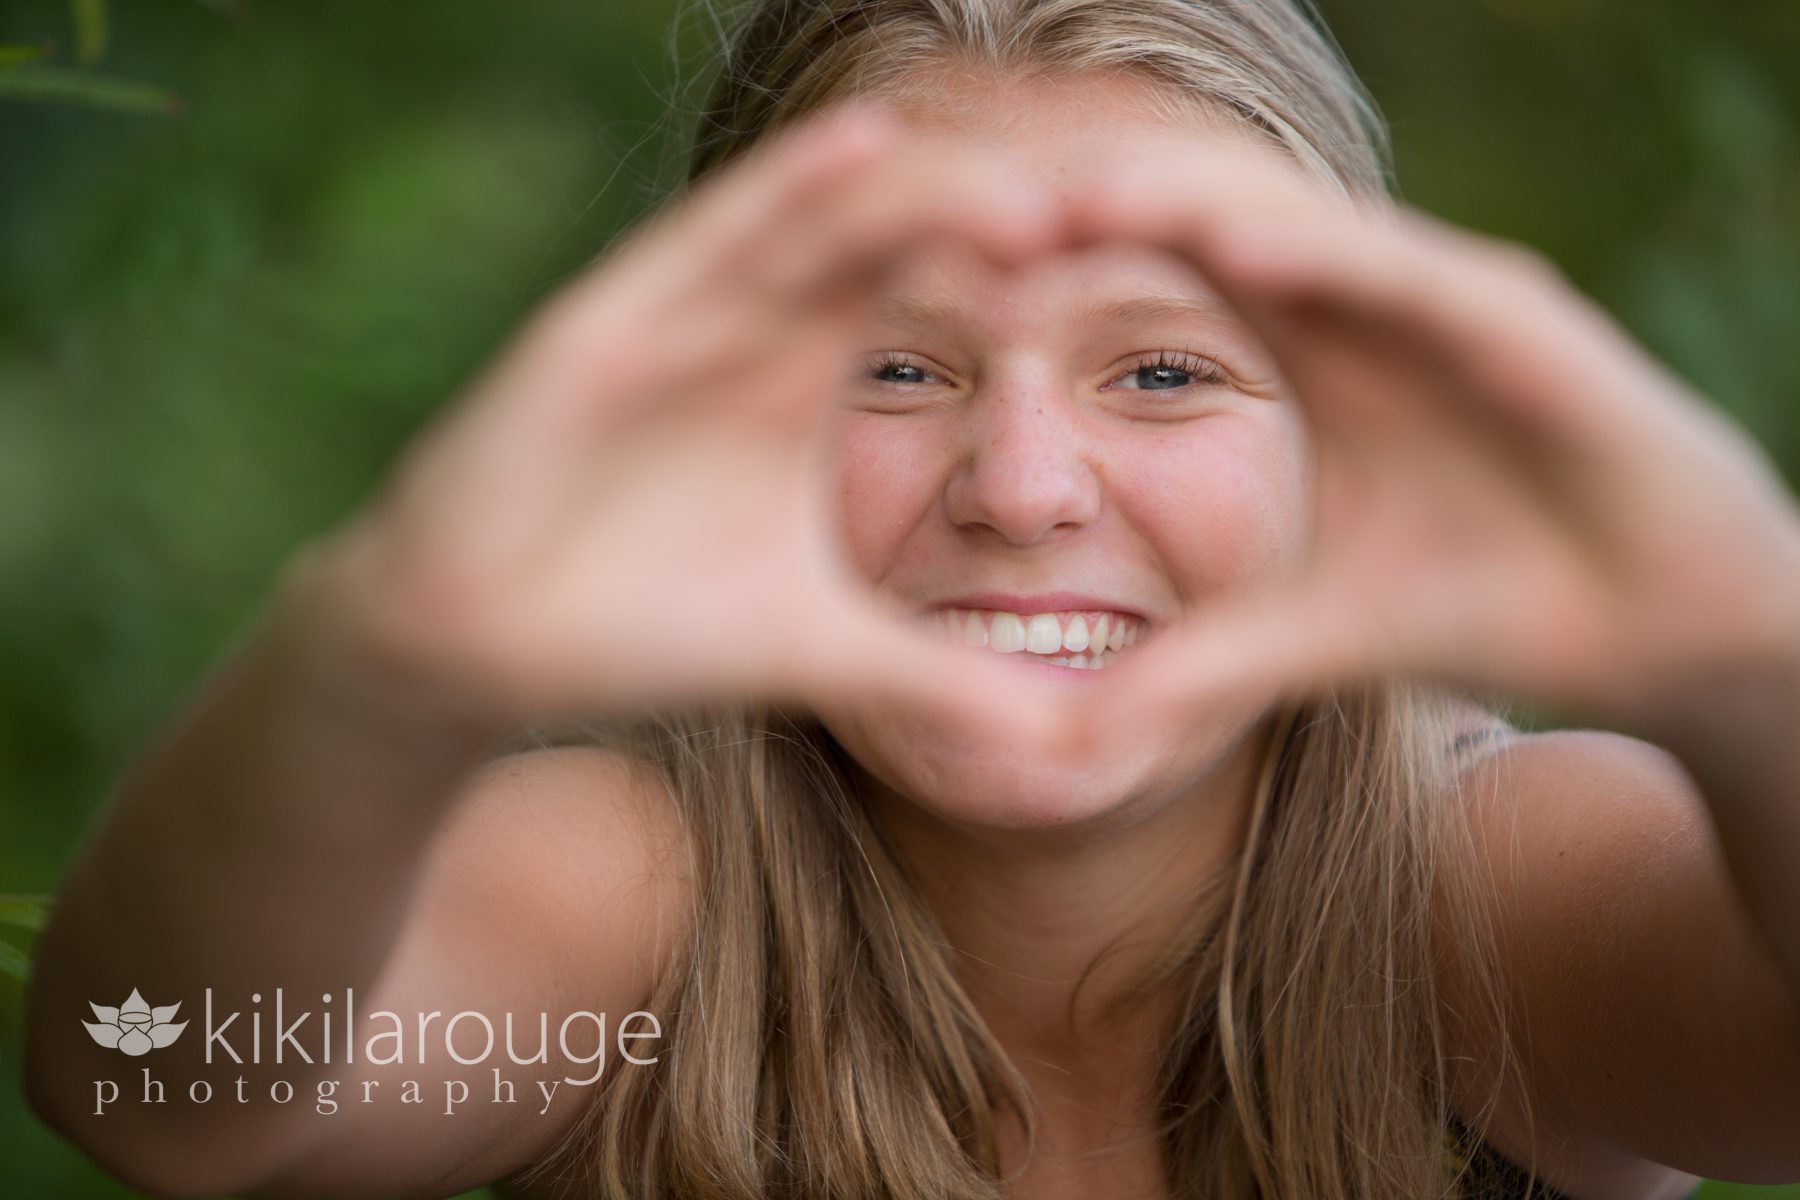 Girl making a heart sign with her hands